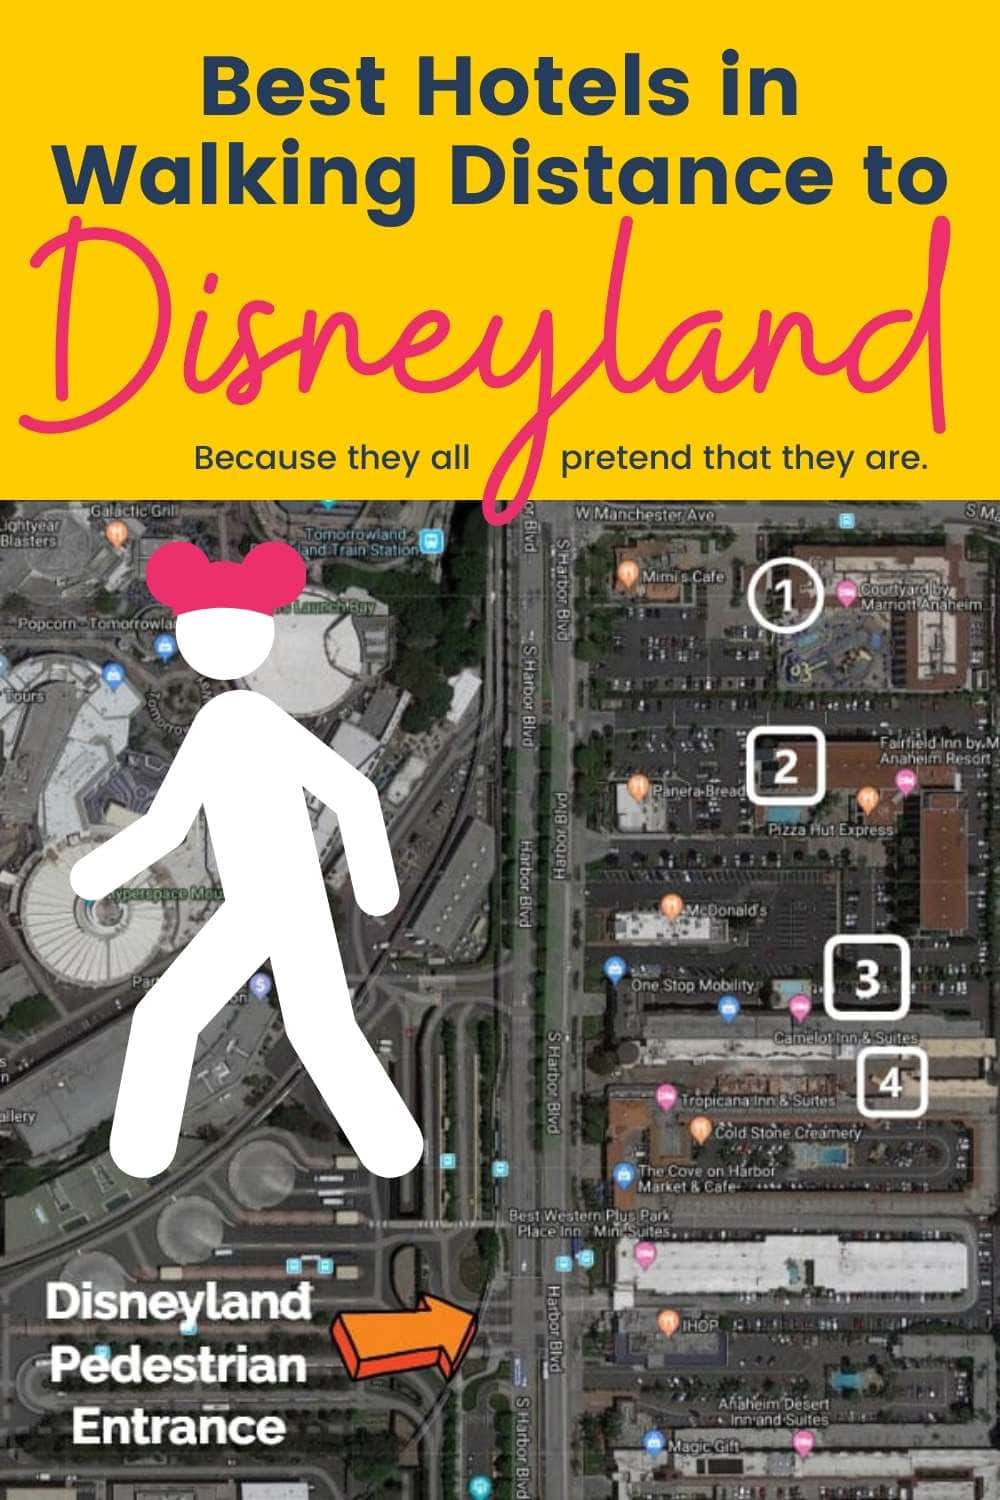 Hotels Nearby Disneyland: Many hotels say they are within walking distance to Disneyland, Caflironia -- but you have to remember that the park itself starts far beyond the property line and that walking will be a huge part of your day already.  Let's talk about value hotels that are really close to Disneyland! via @pullingcurls